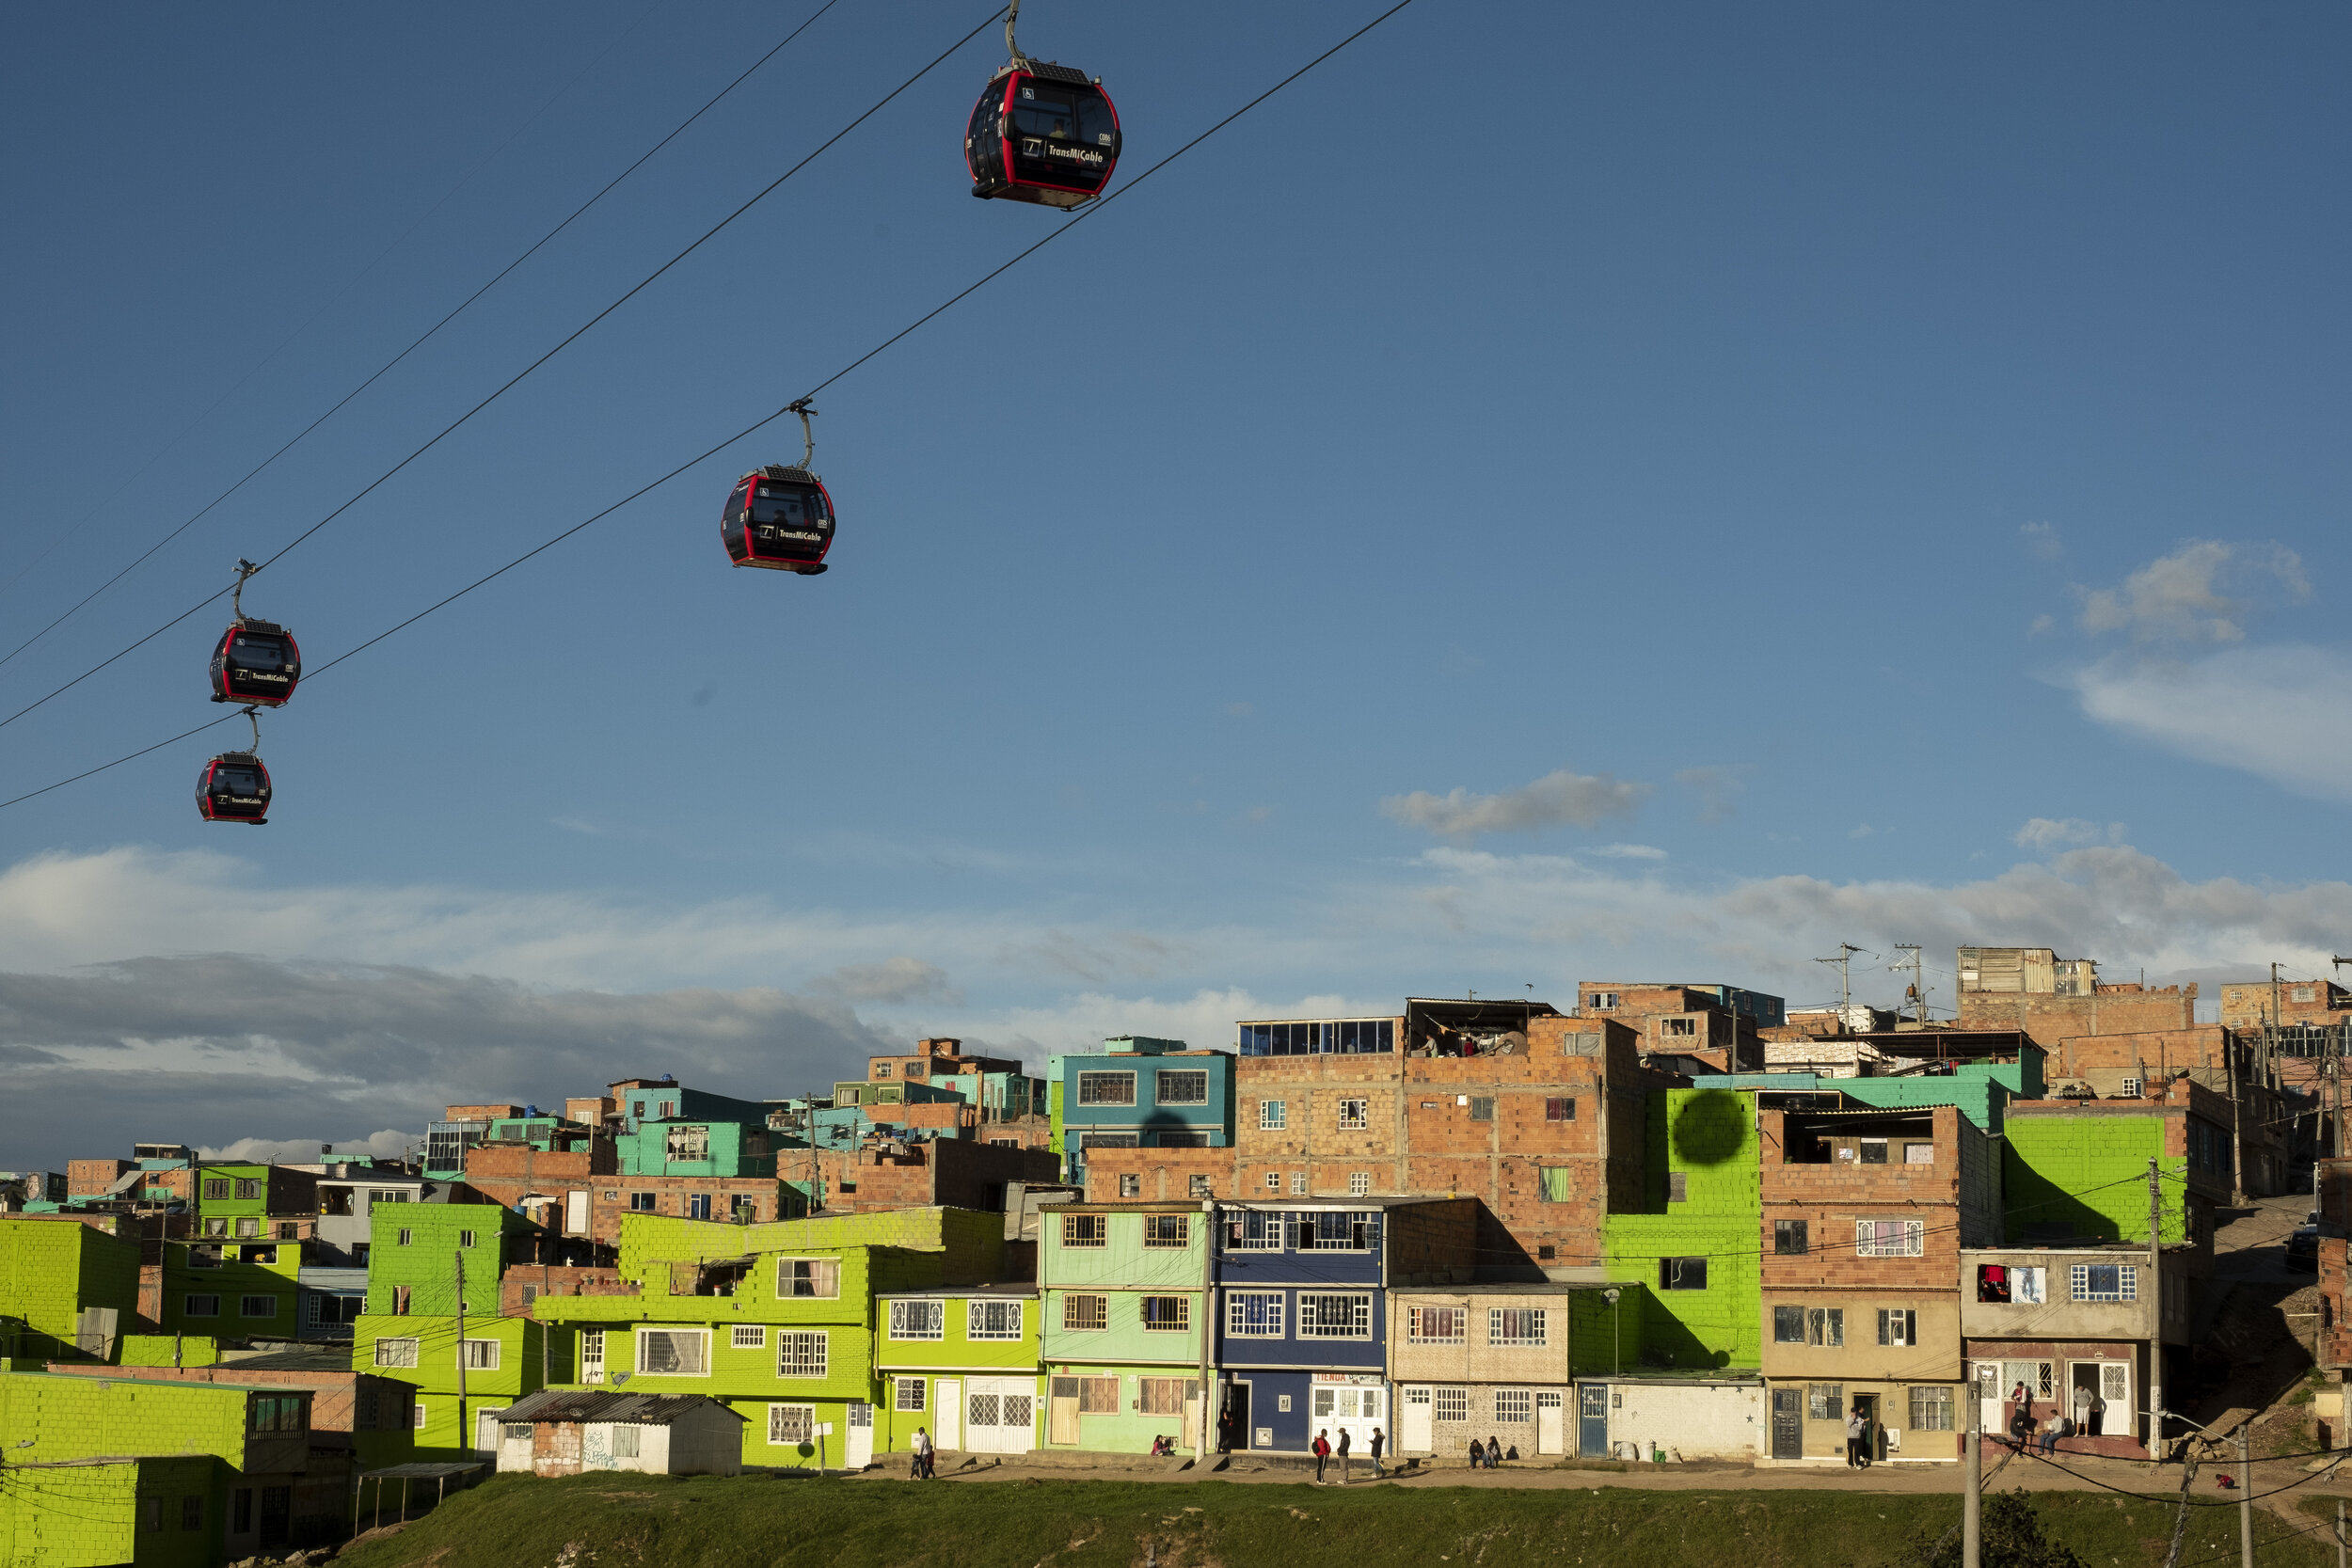  The TransMiCable aerial gondola system passes over the multicolored homes of Juan Pablo II, one of the neighborhoods of Ciudad Bolivar served by the transit system since 2018. 